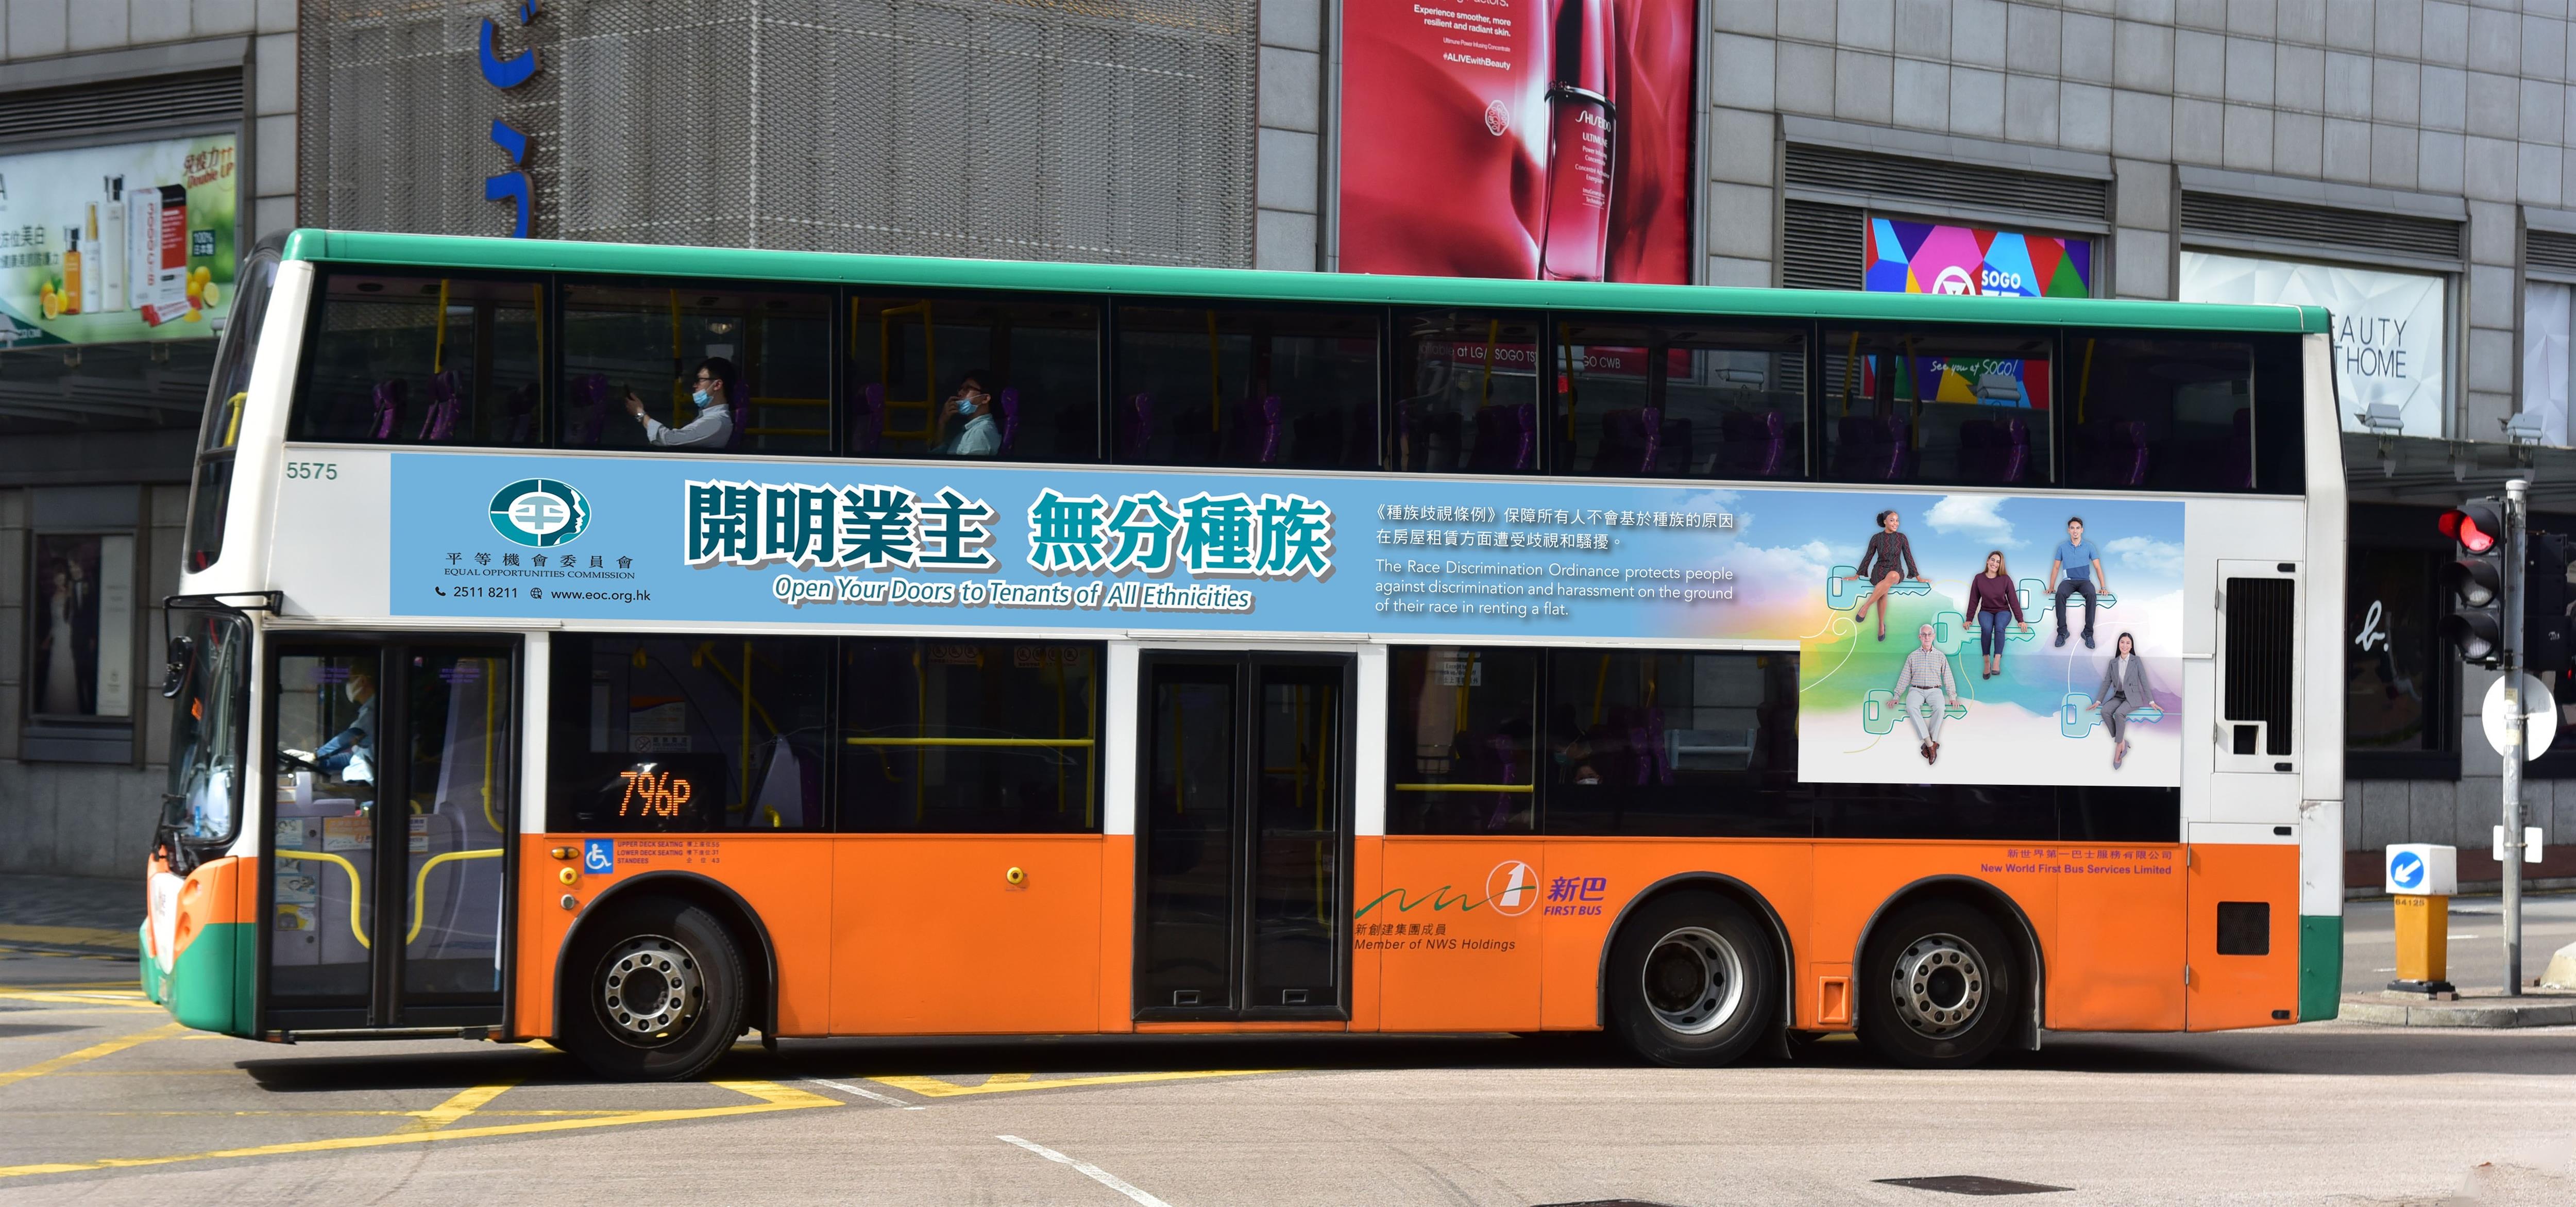 The Equal Opportunities Commission launched a bus body advertising campaign under the tagline “Open Your Doors to Tenants of All Ethnicities” on 5 December 2022 to promote racial equality in tenancy.